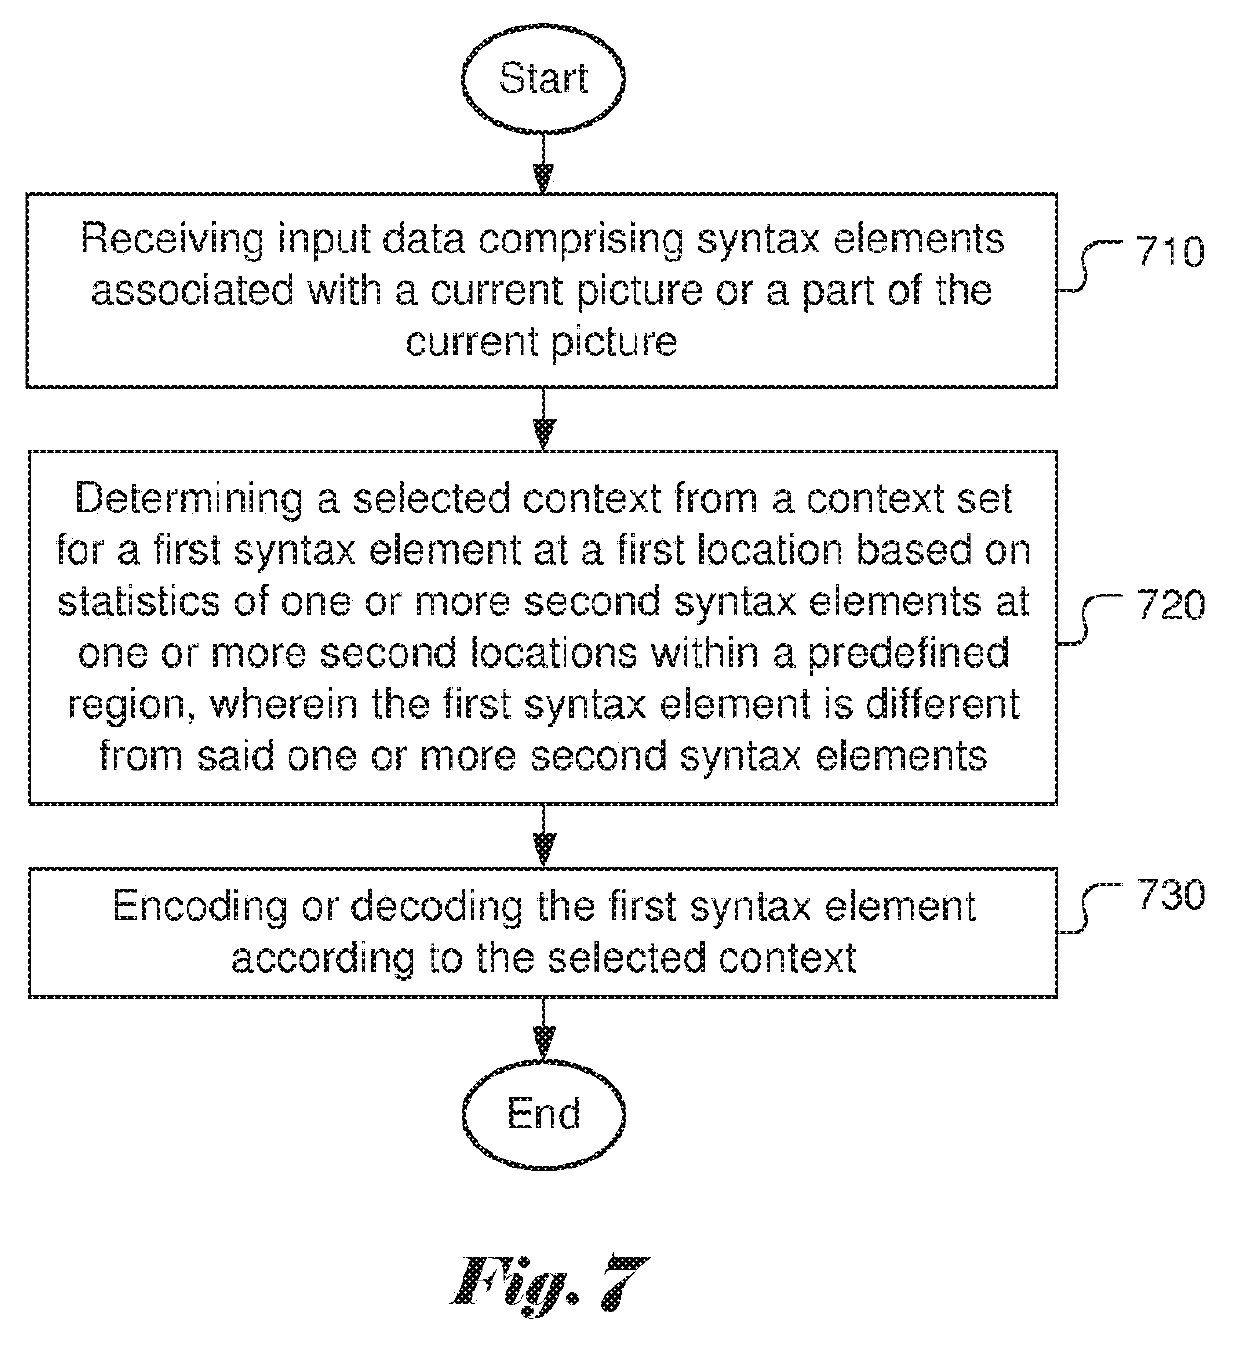 Method and apparatus of context modelling for syntax elements in image and video coding